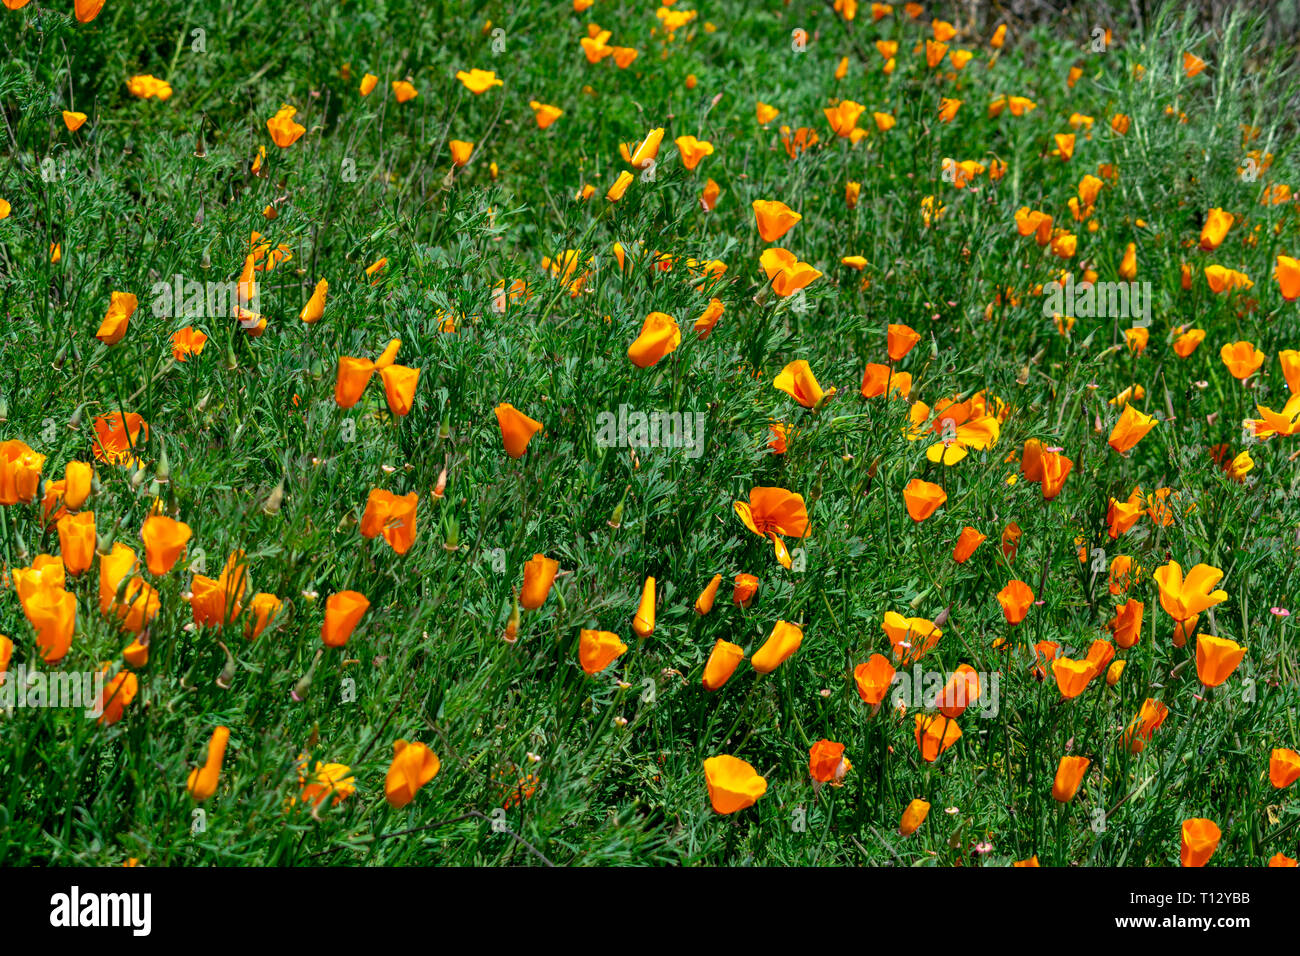 Field of California poppies, official state flower of California, in a super bloom. Showy cup-shaped flowers in brilliant shades of orange and yellow Stock Photo